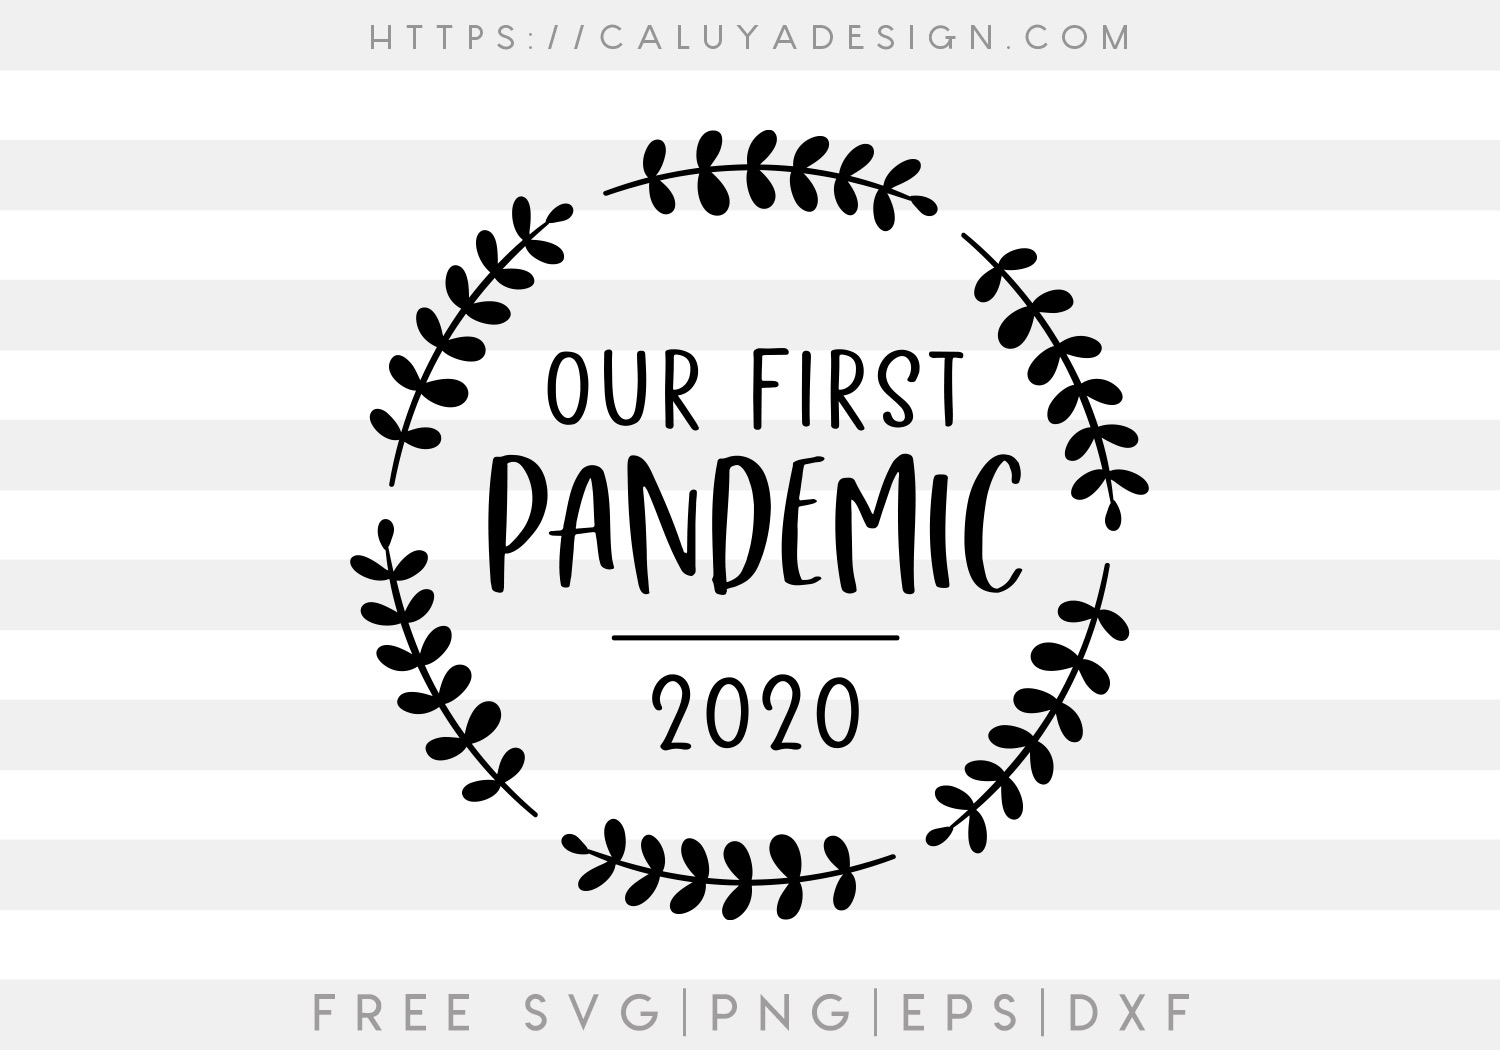 Our First Pandemic SVG, PNG, EPS & DXF